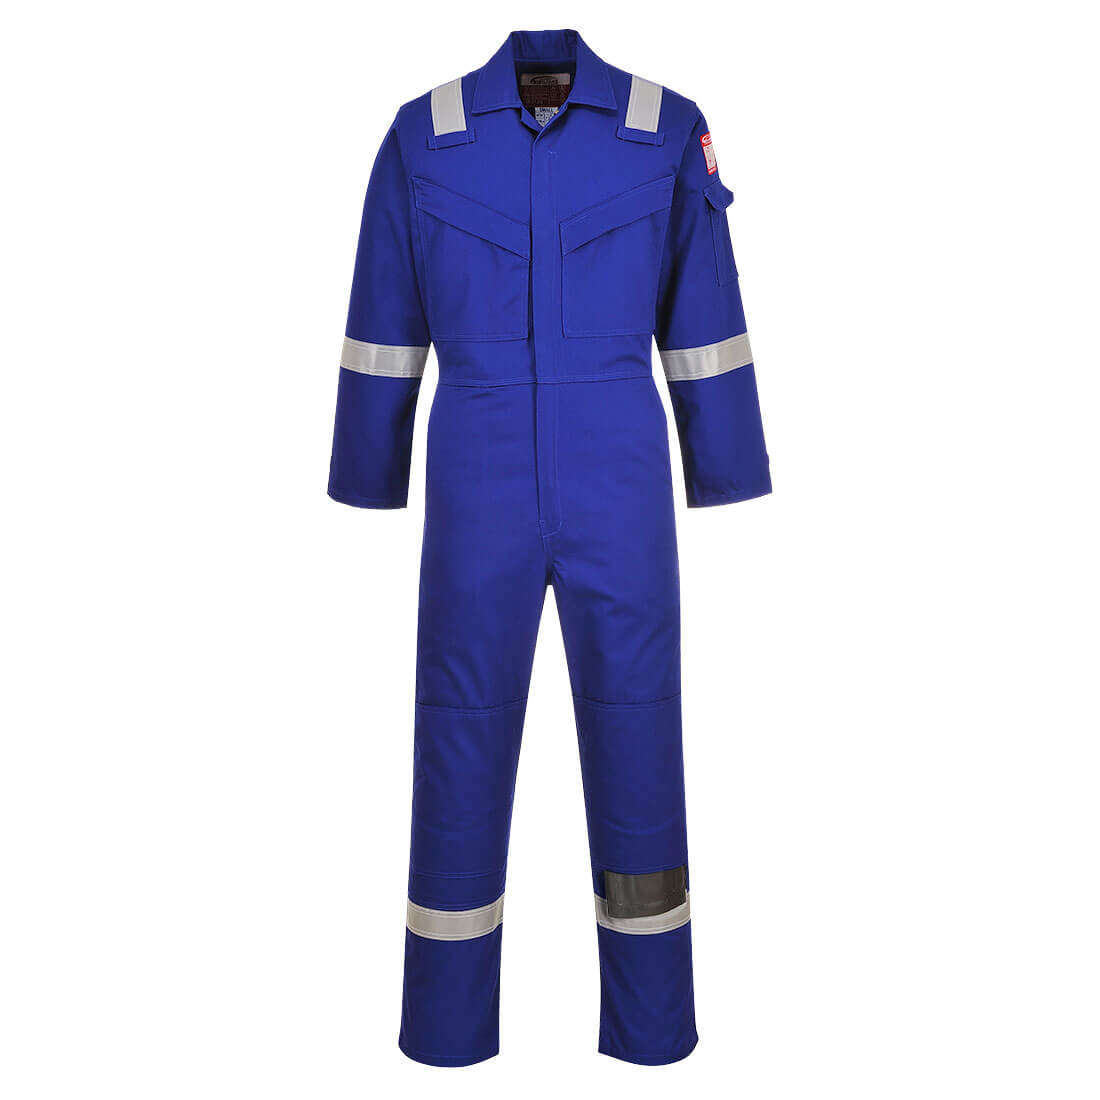 Image of Biz Flame Mens Aberdeen Flame Resistant Antistatic Coverall Royal Blue 4XL 32"